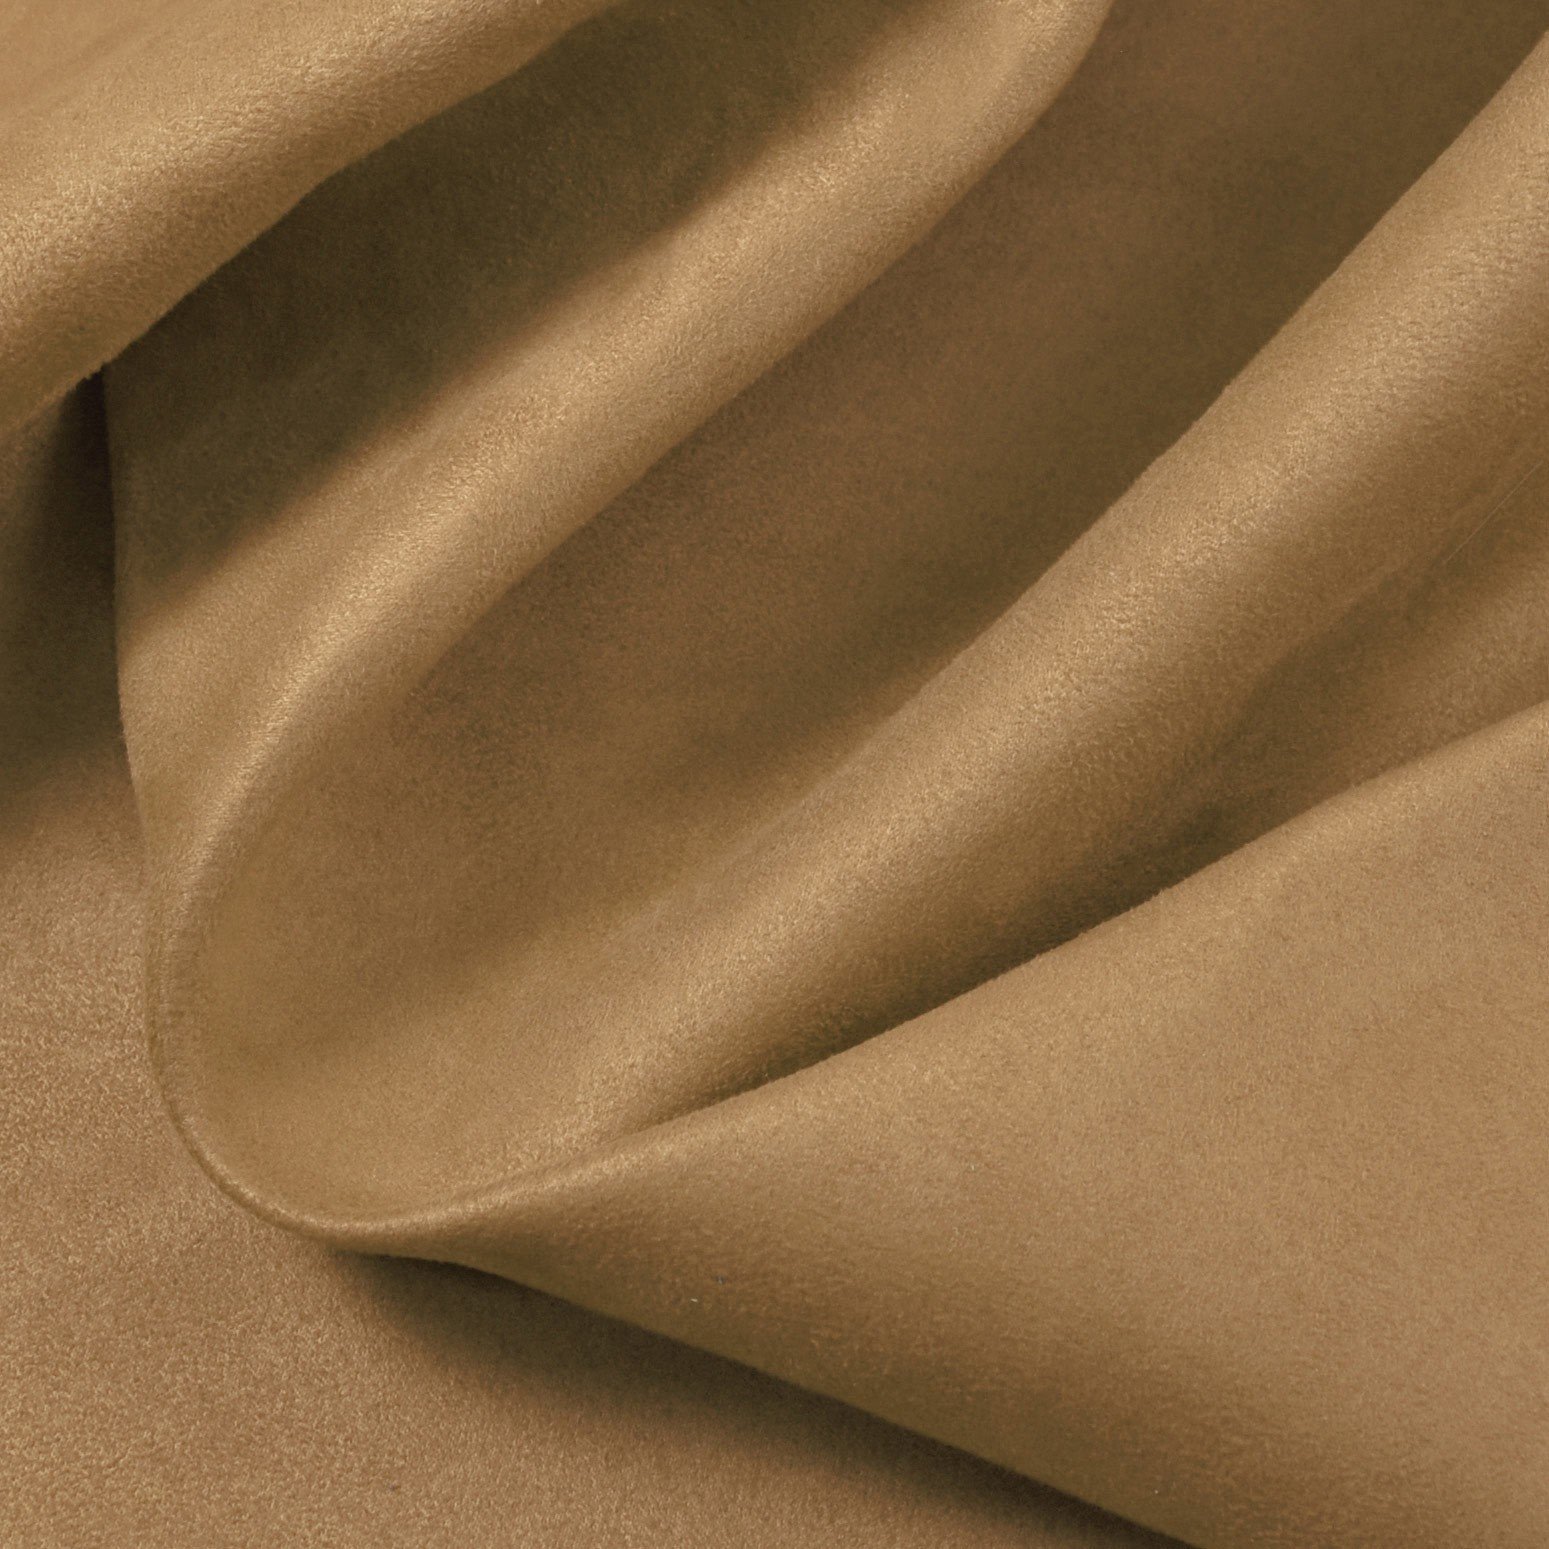 Stiff Thick Faux Leather Sheets - WINIW Microfiber Leather